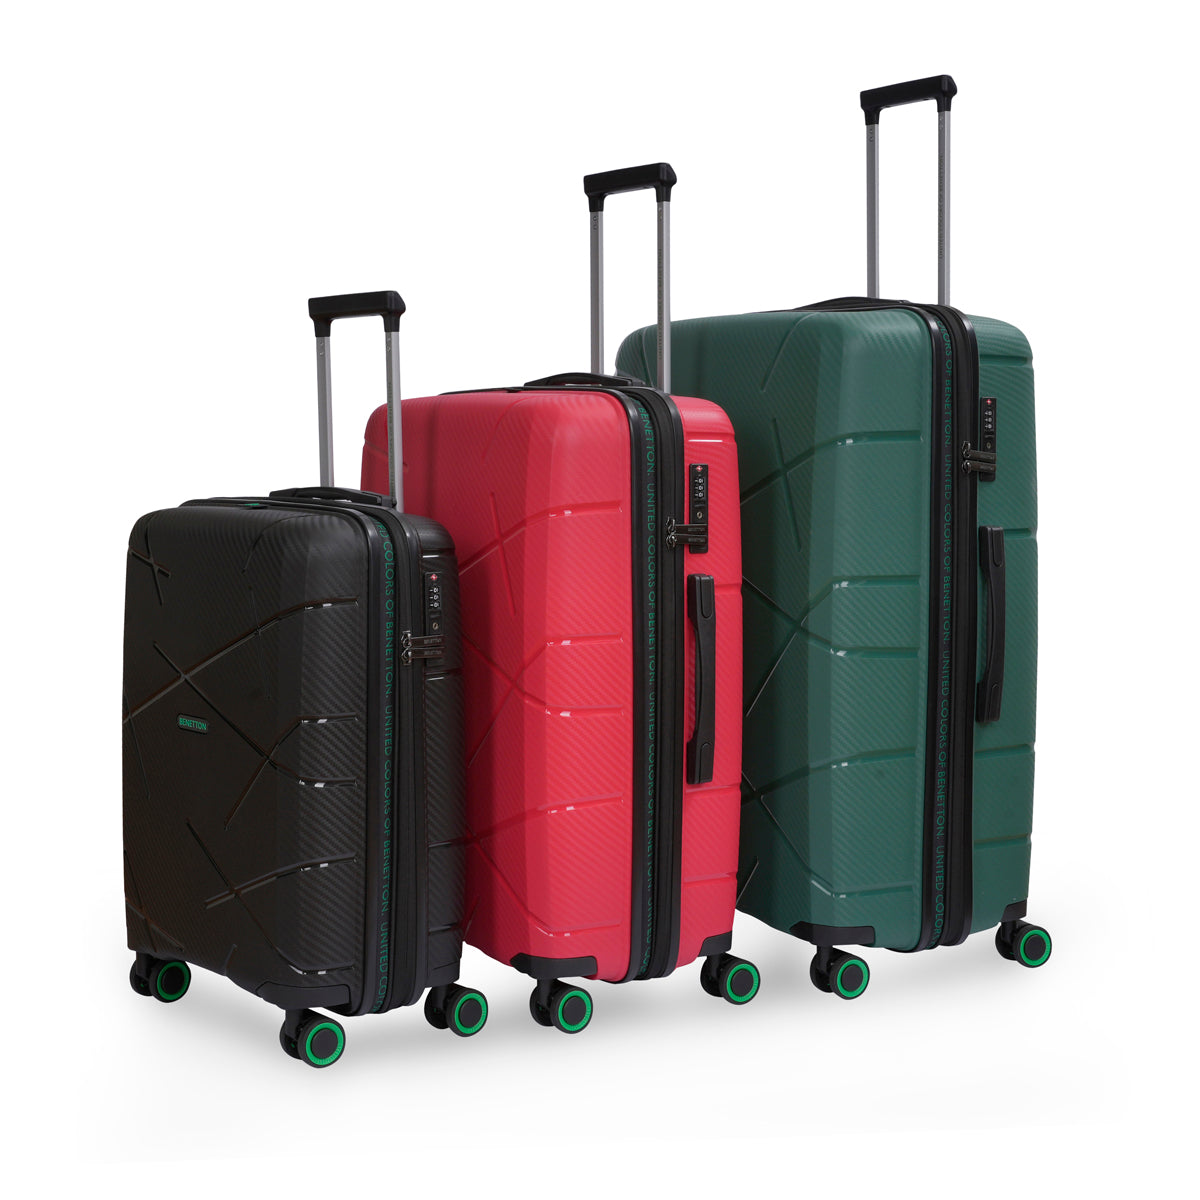 United Colors of Benetton Moonstone Hard Luggage Green